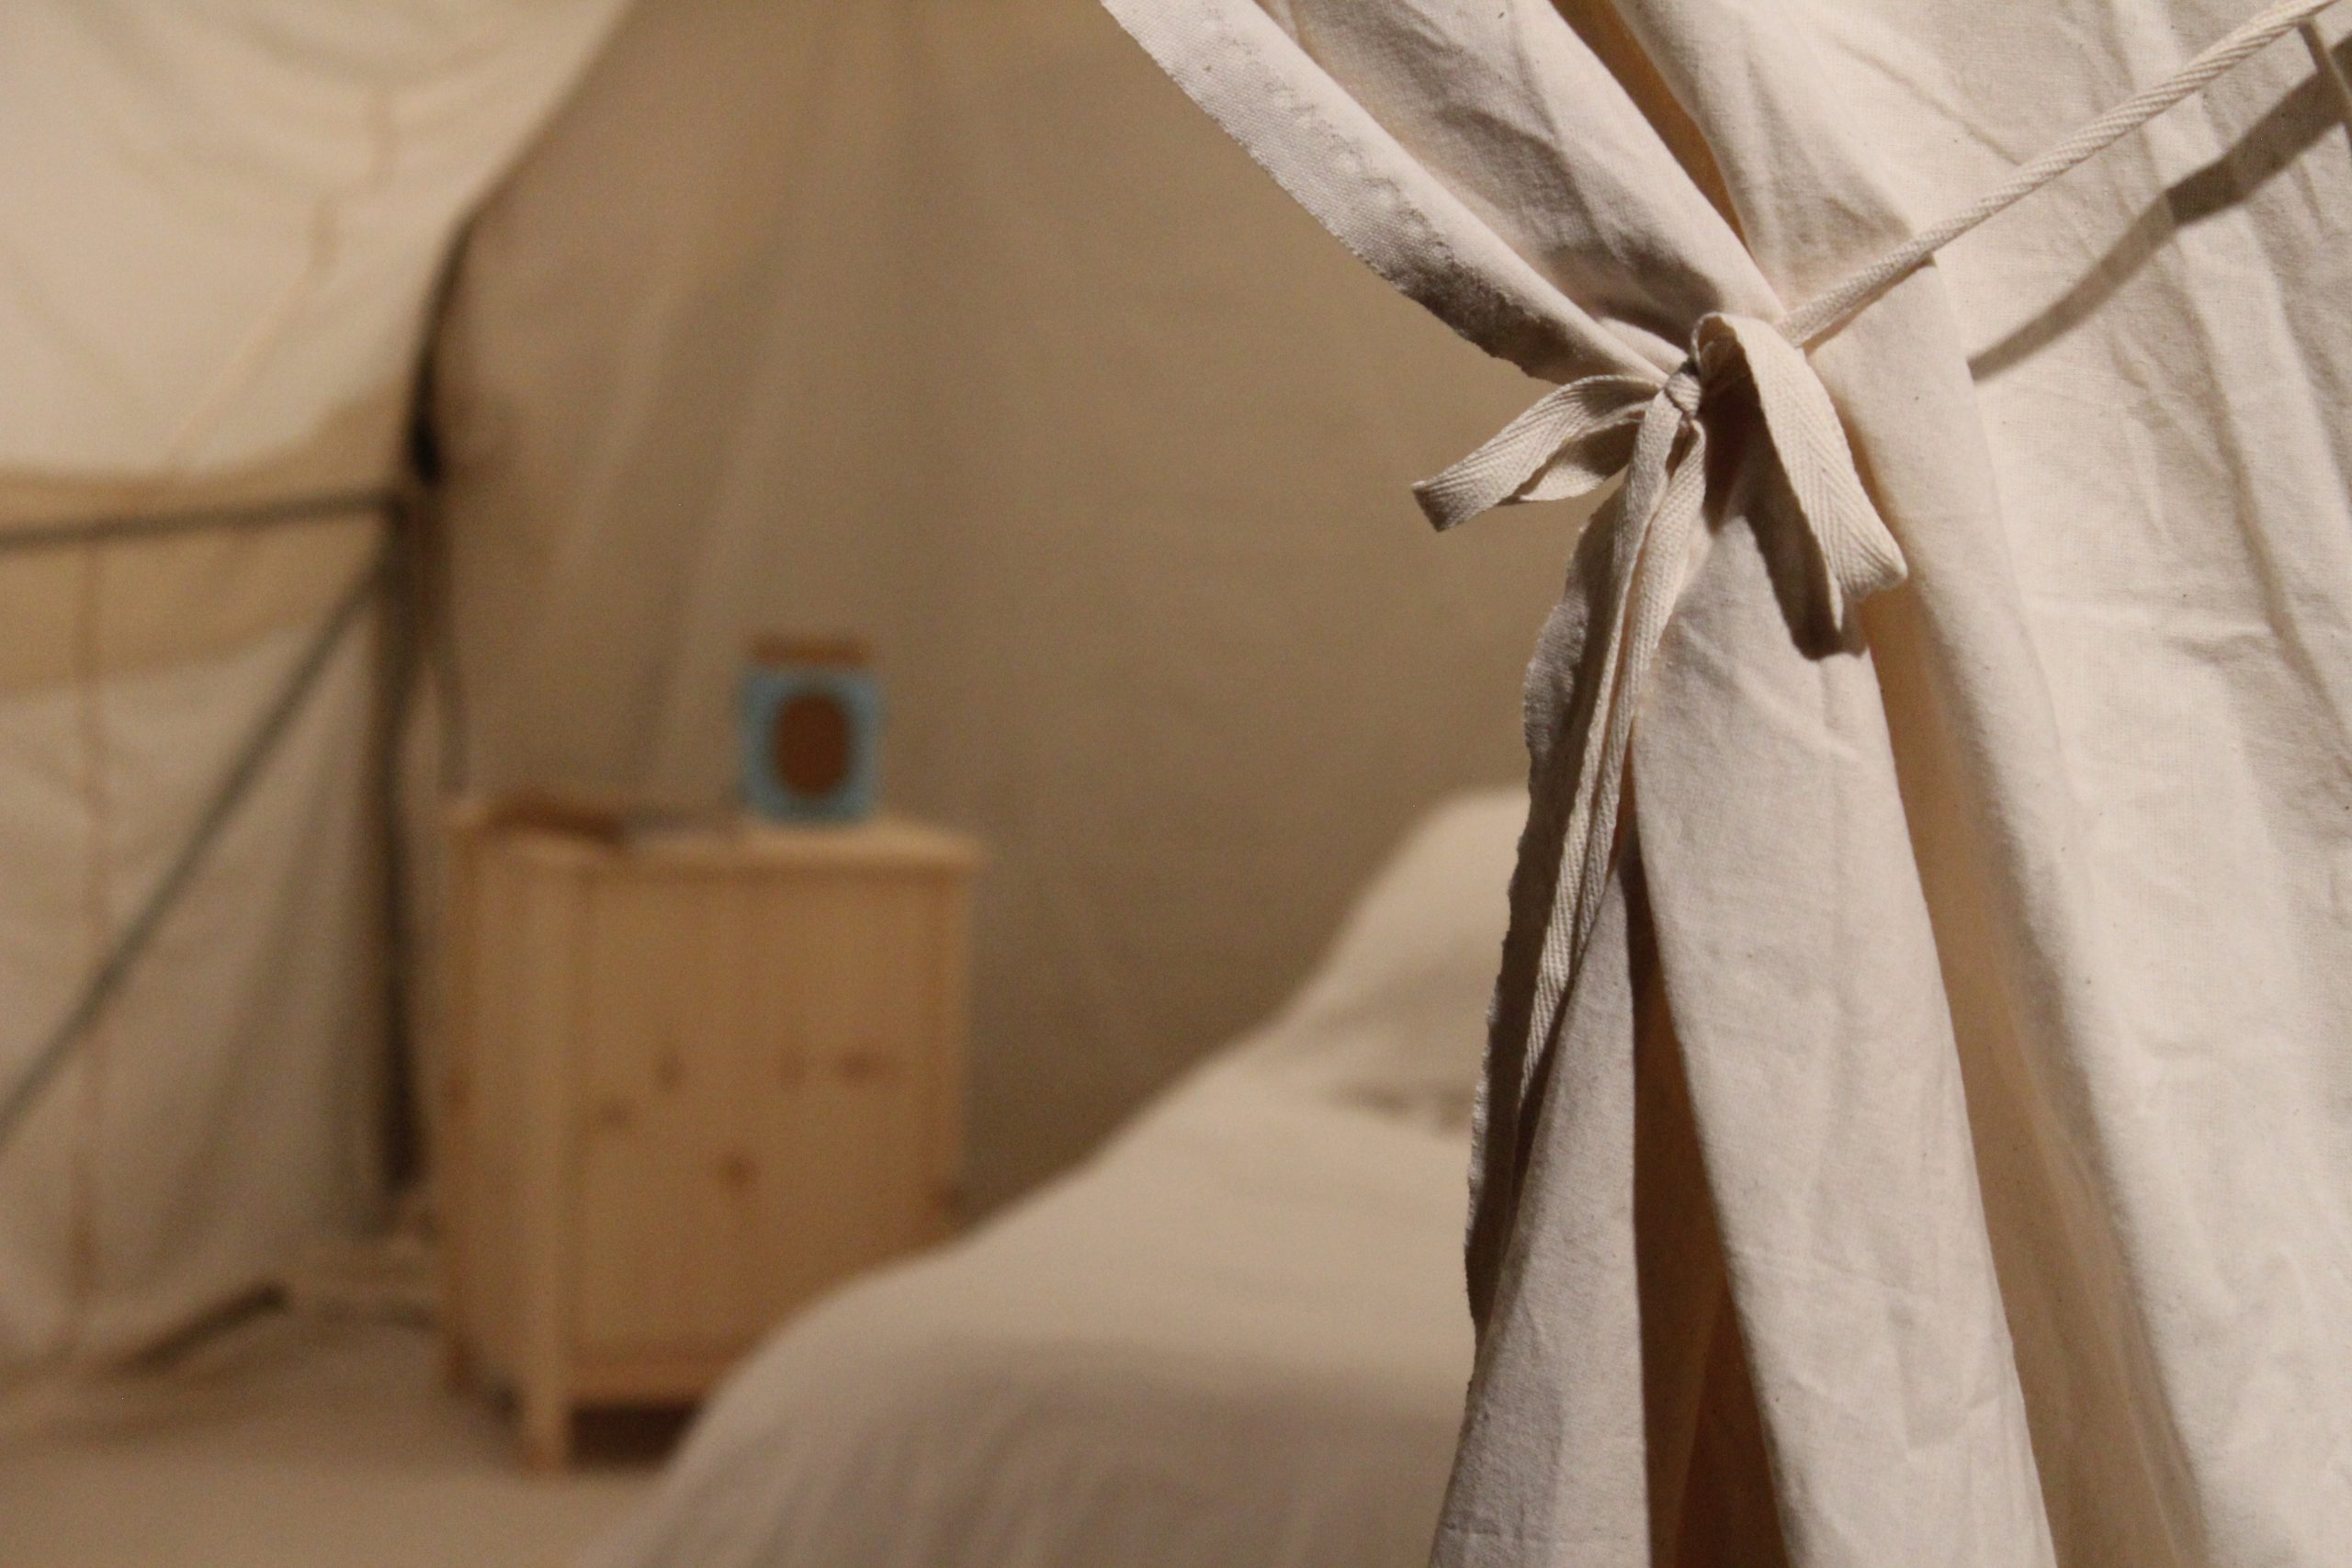 A cream curtain pulled back to show the inside of a tent structure, with a white bed and wooden cabinet.